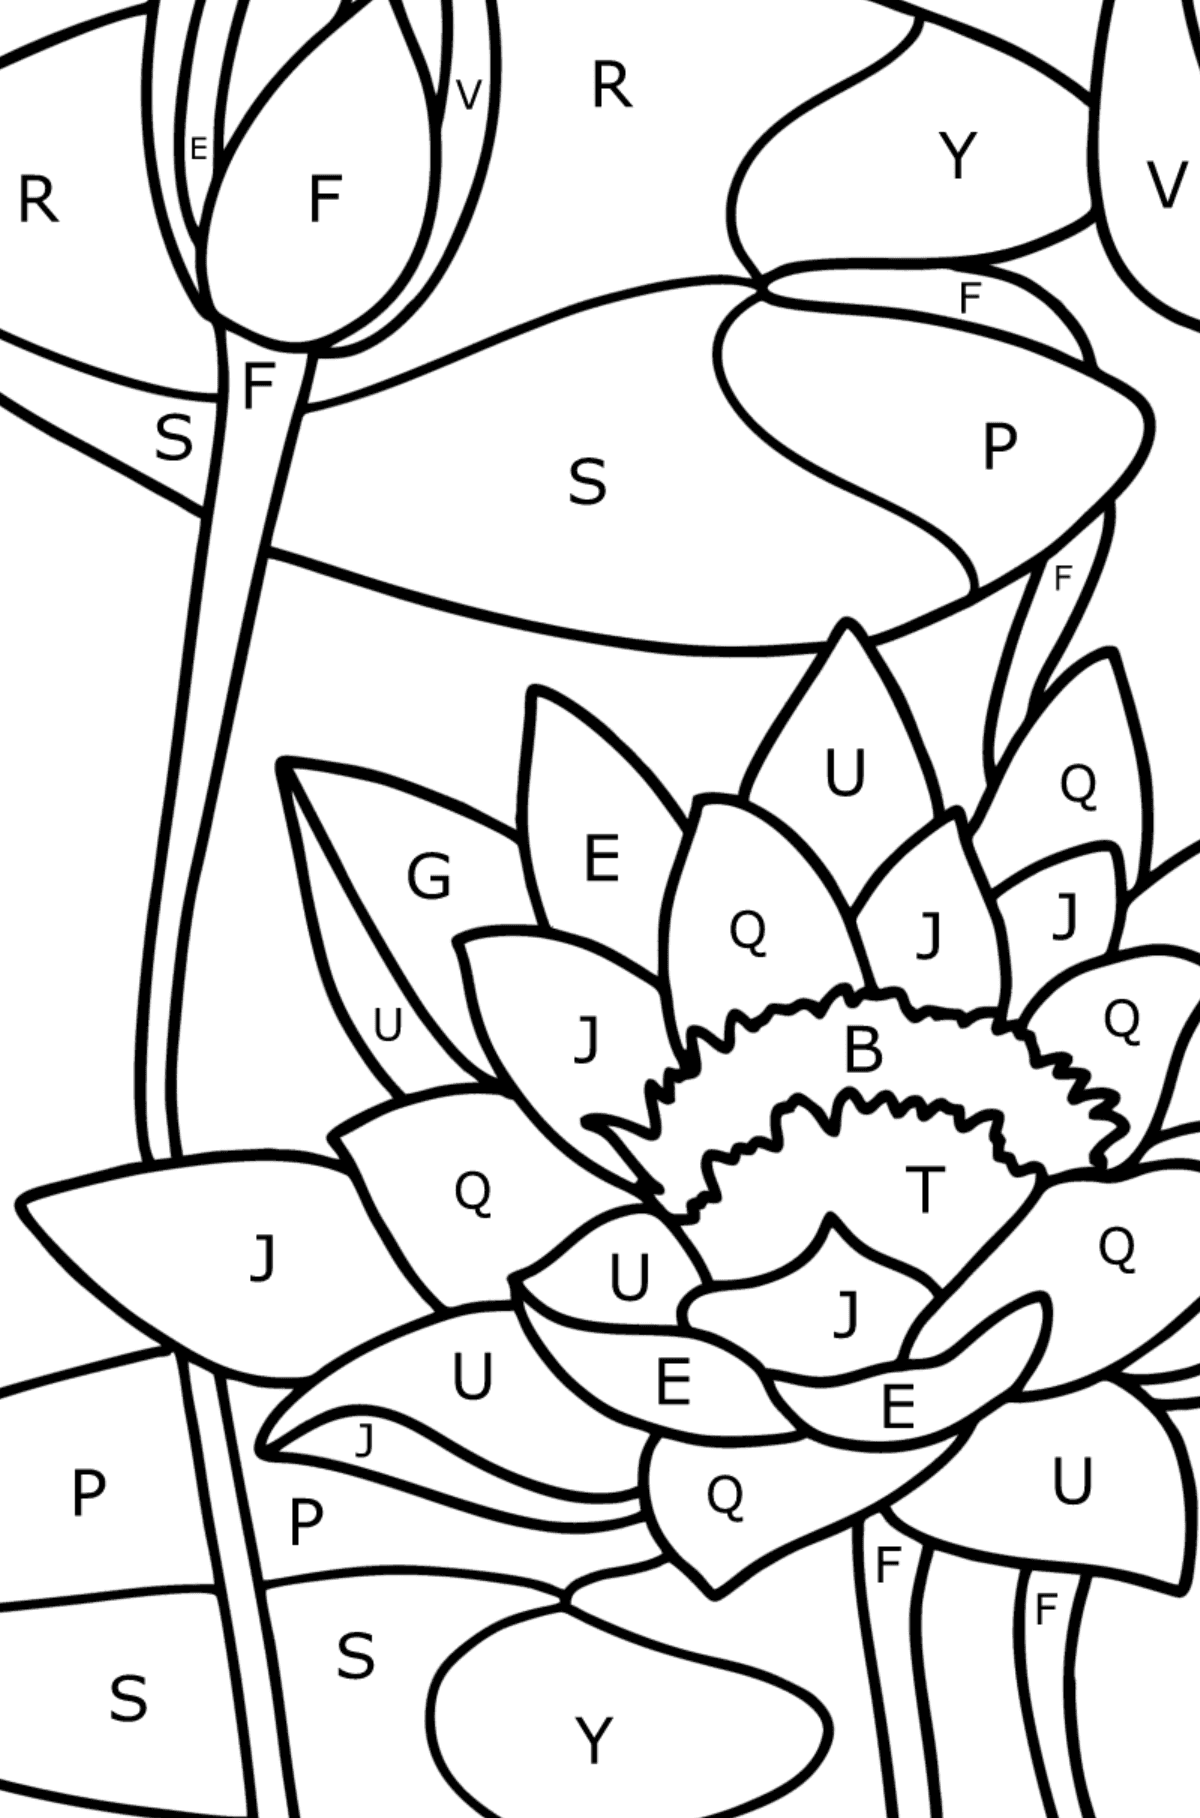 Water lily coloring page - Coloring by Letters for Kids